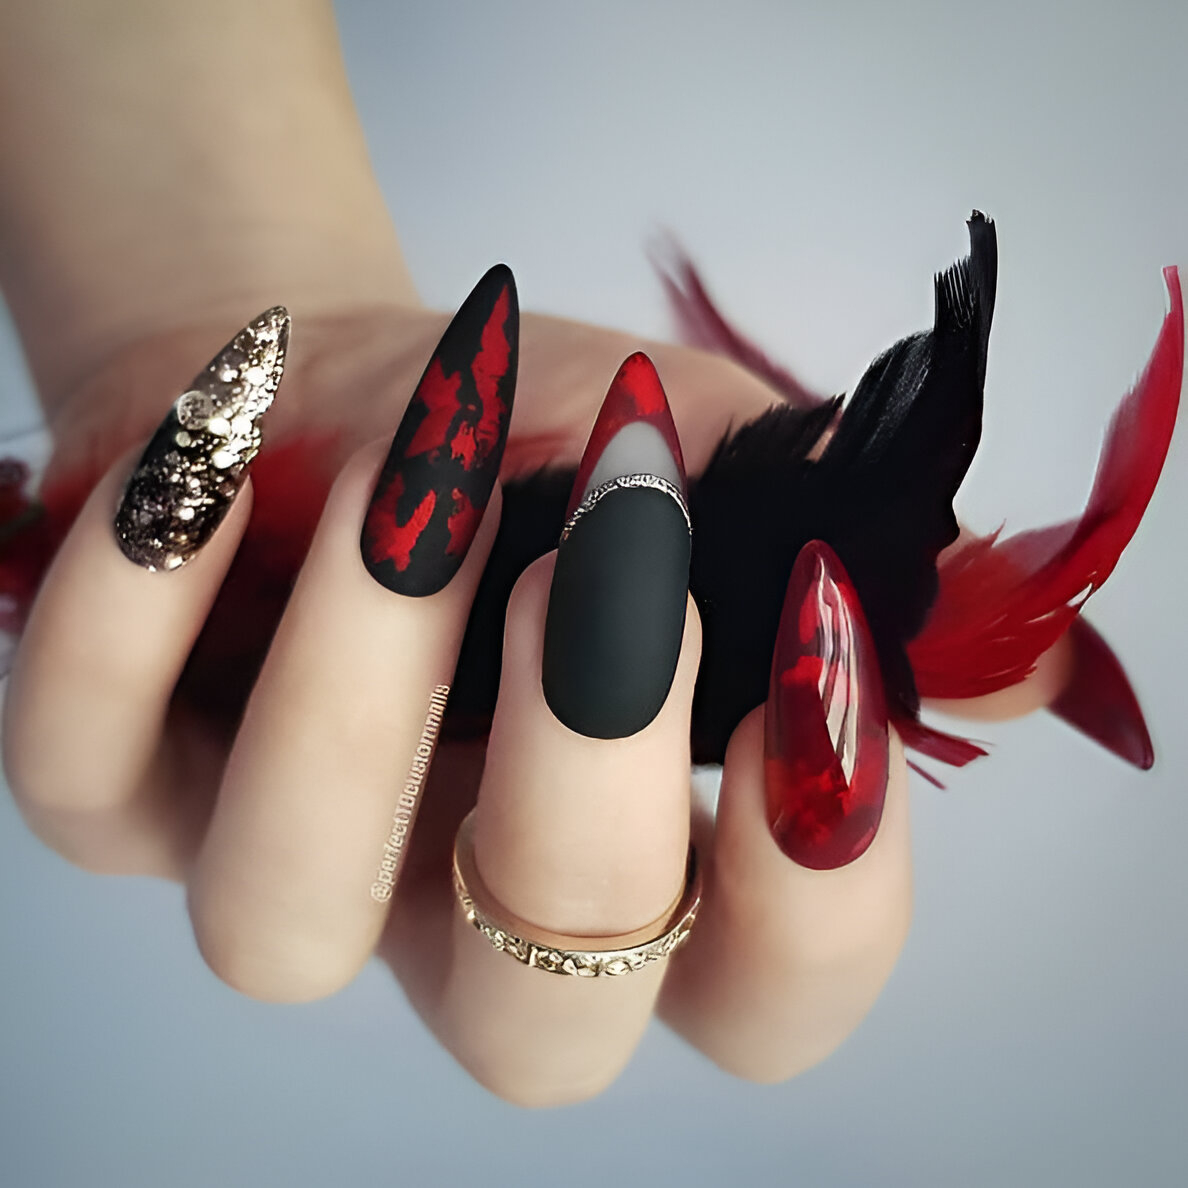 Glamorous Black And Red Nails